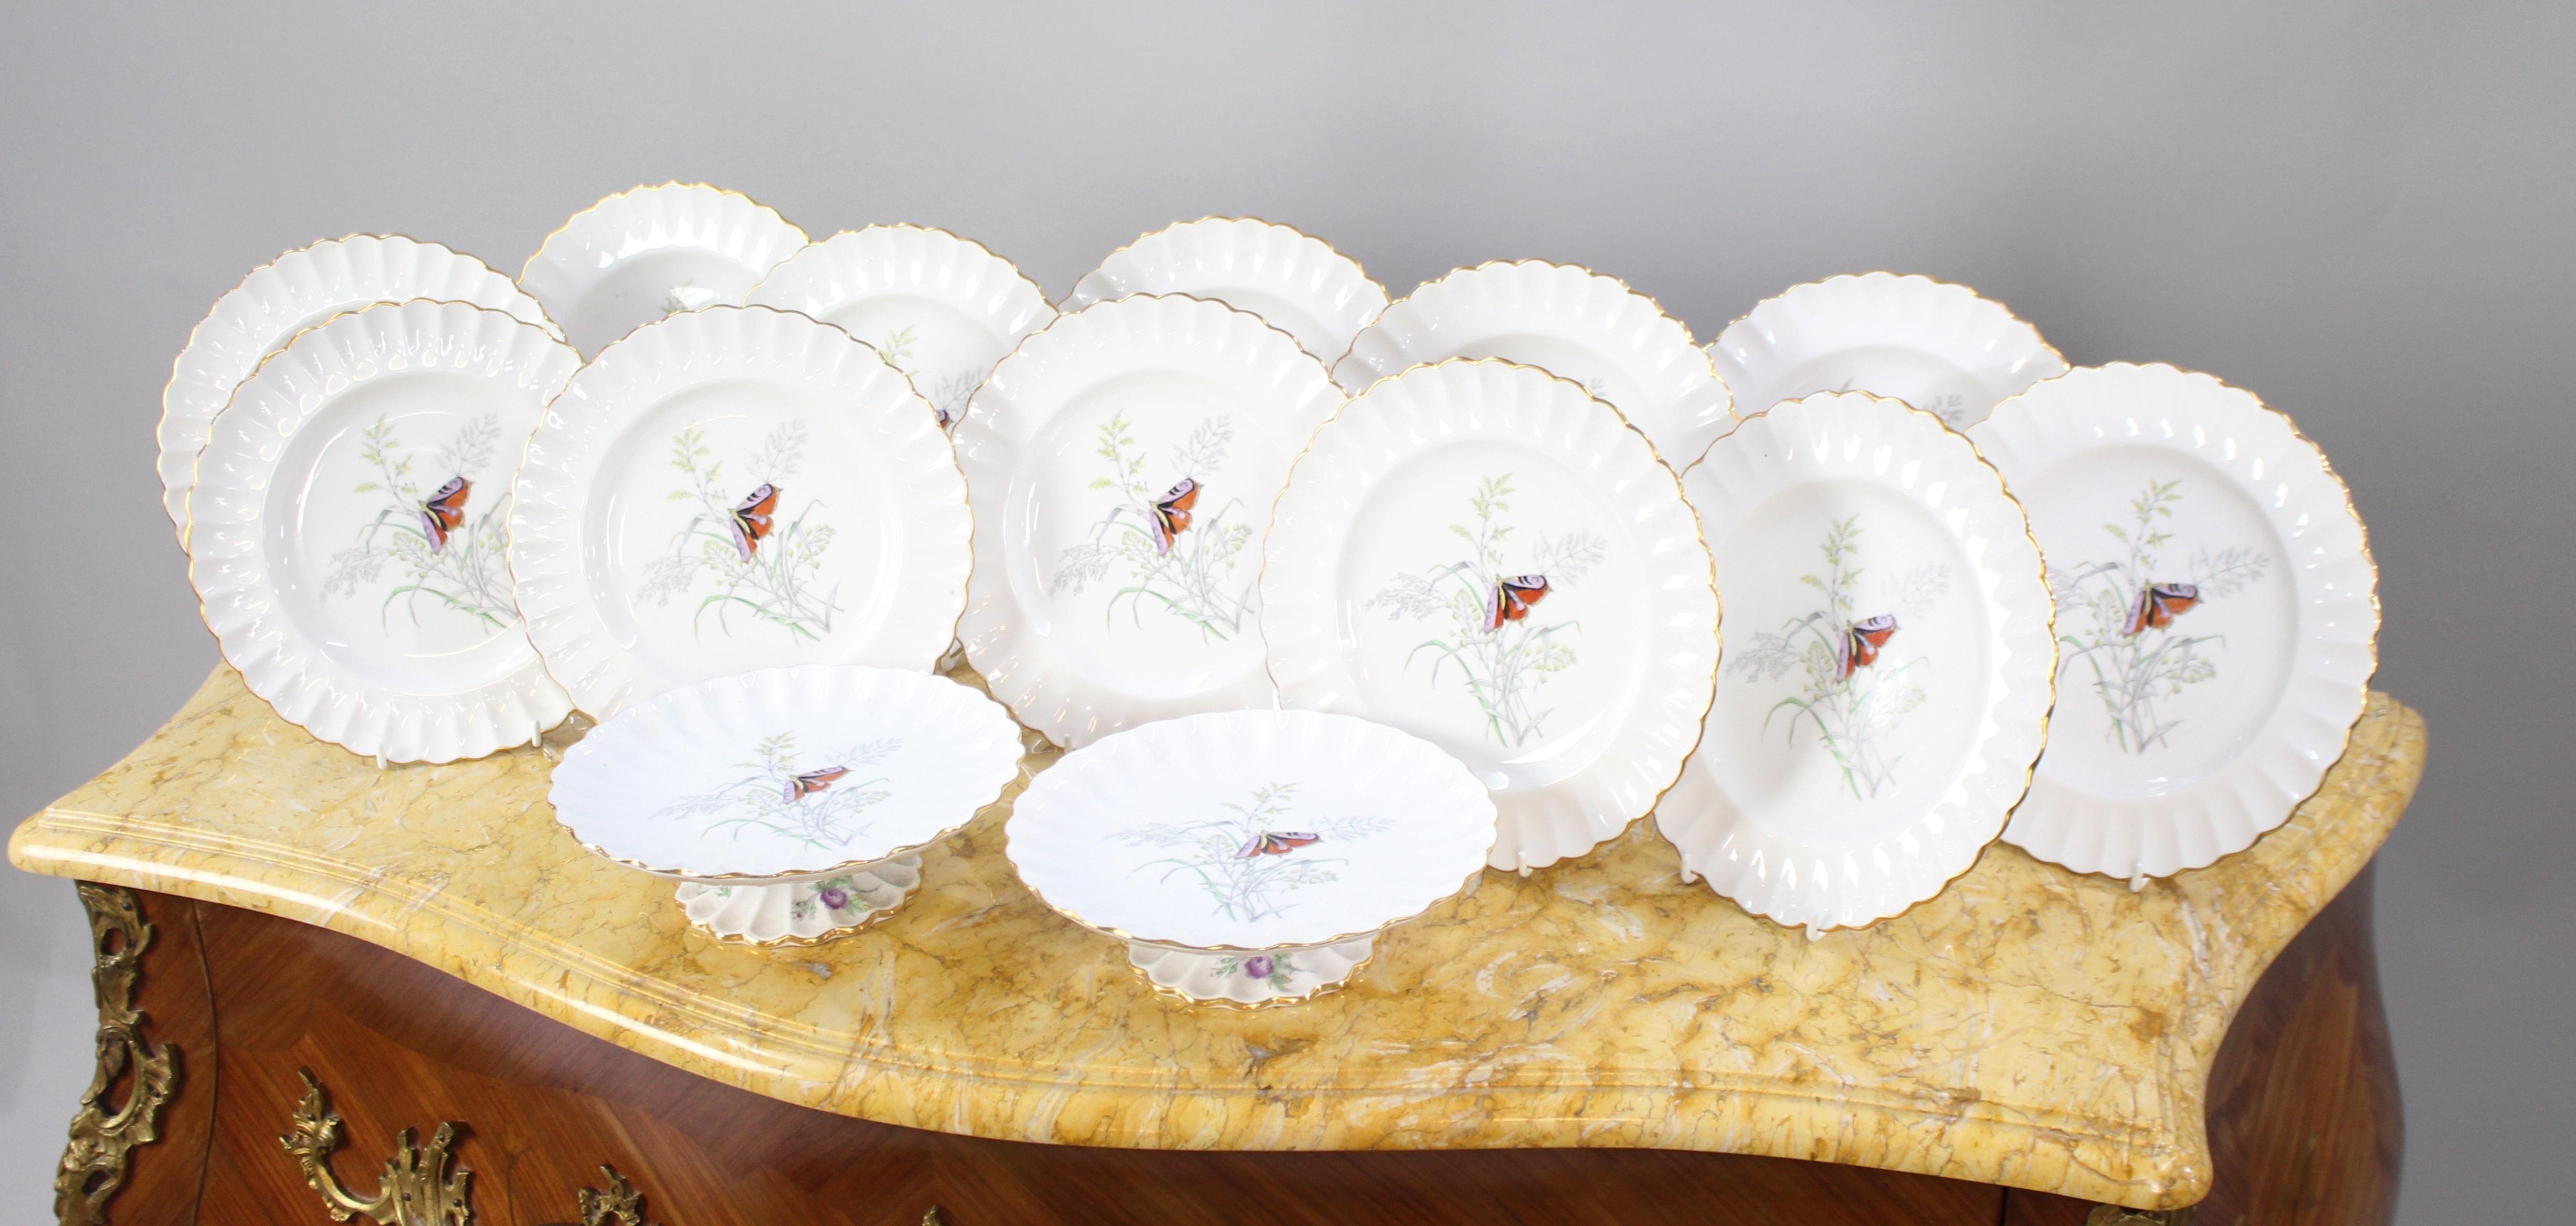 14 piece Spode butterfly pattern dessert service 1954


Manufacturer Spode

Pattern Y7378 - Grasses & butterfly with fluted border and gilded rim

Date 1954

14 pieces in total; 12 x 9 1/4 in plates & 2 x footed comports

All pieces with